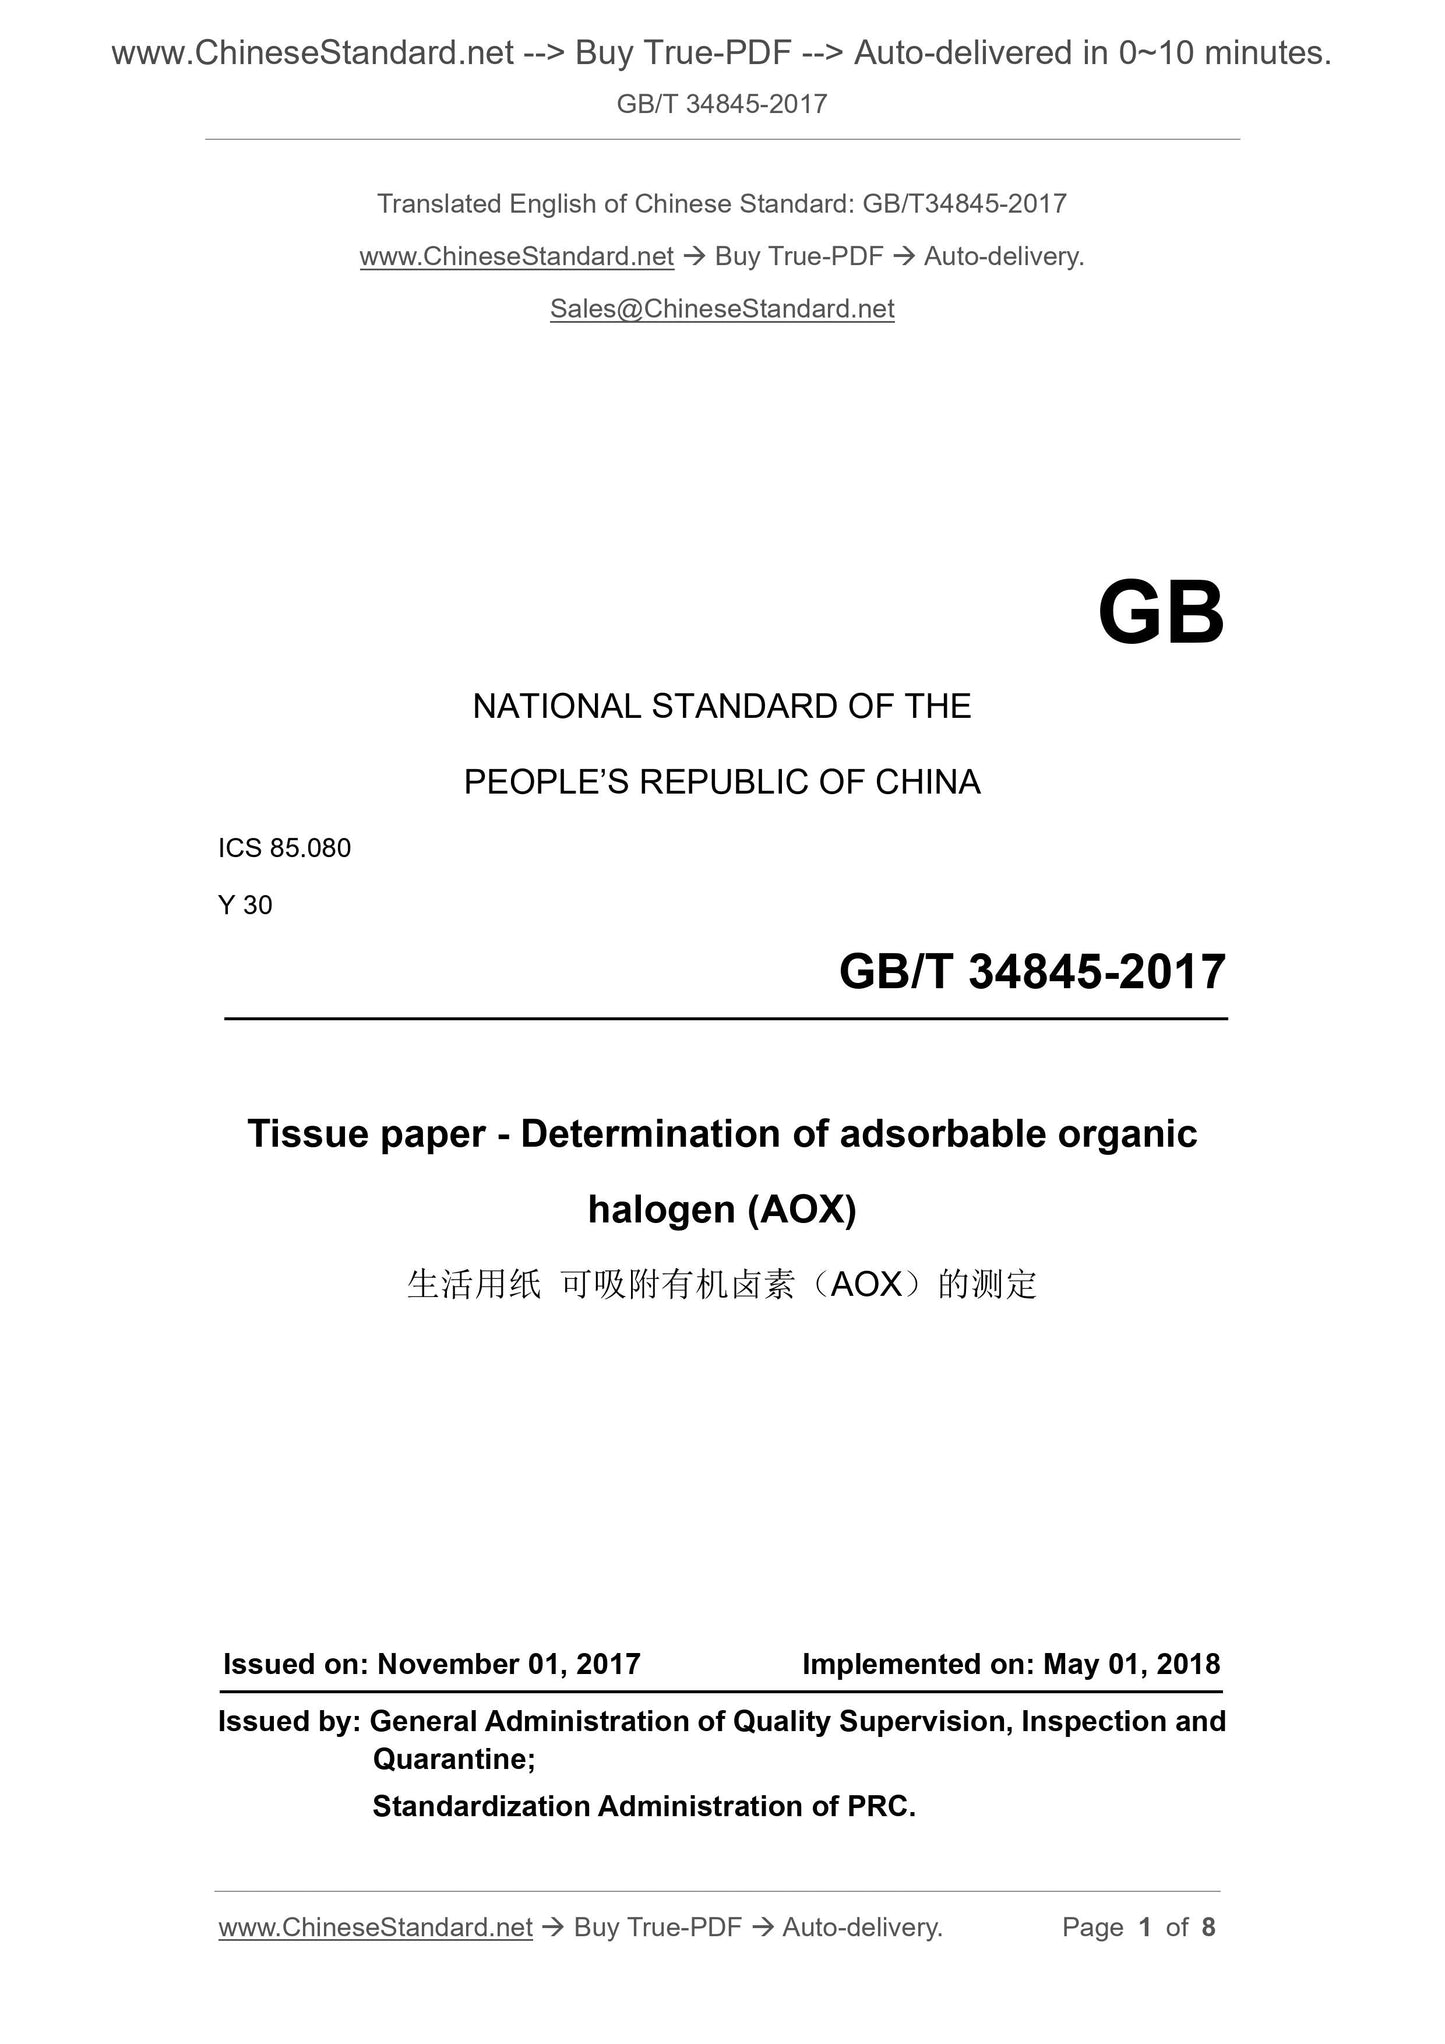 GB/T 34845-2017 Page 1